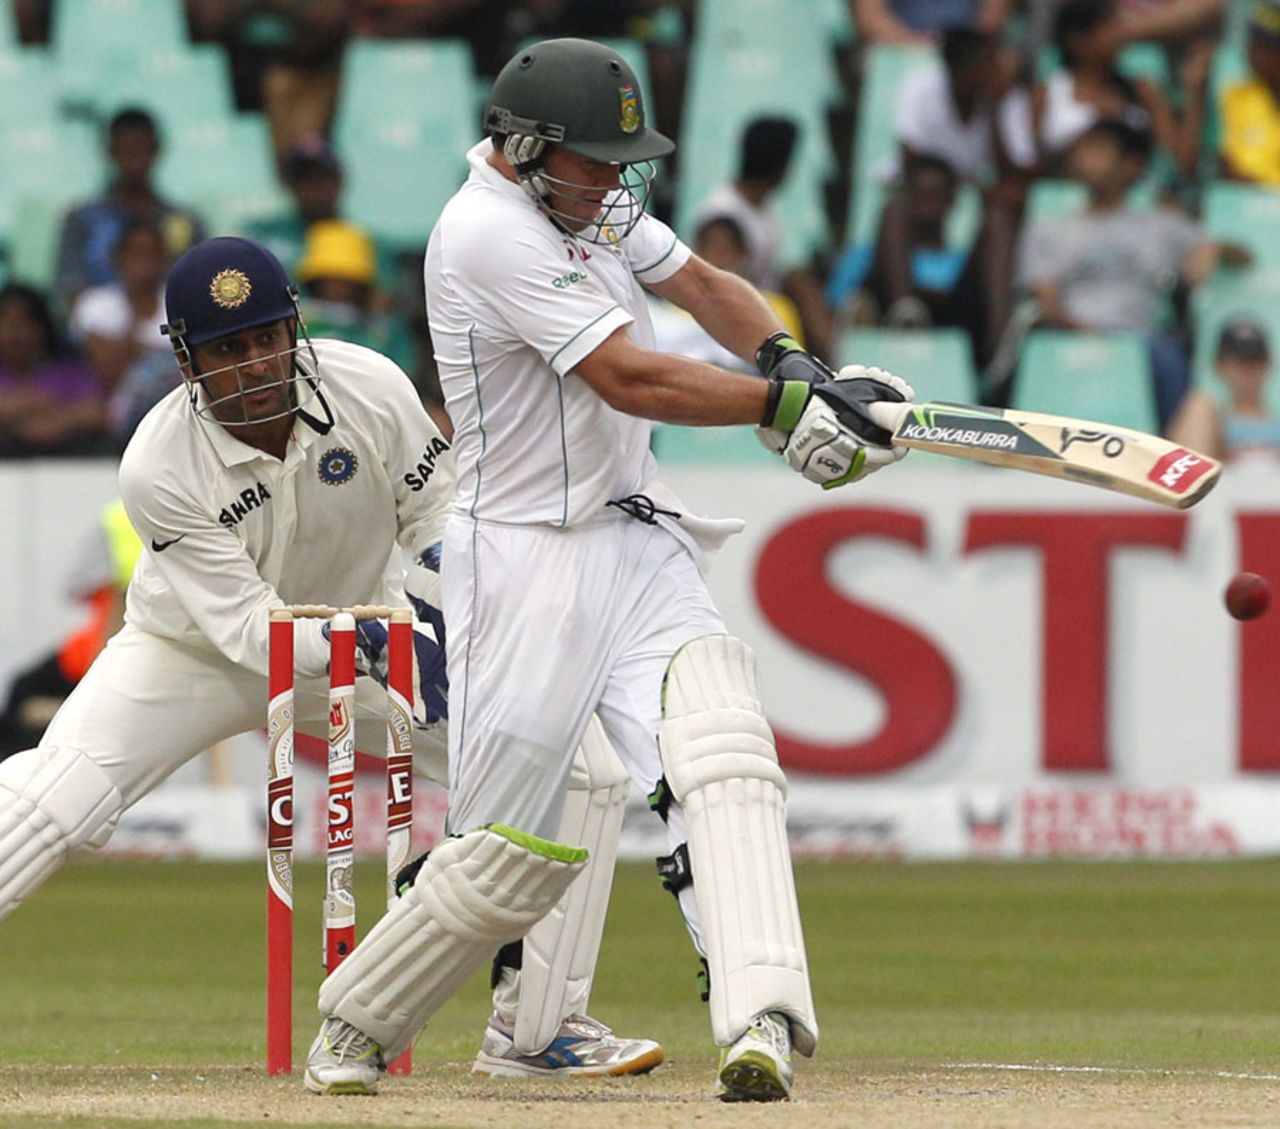 MS Dhoni watches AB de Villiers play a pull shot , South Africa v India, 2nd Test, Durban, 3rd day, December 28, 2010